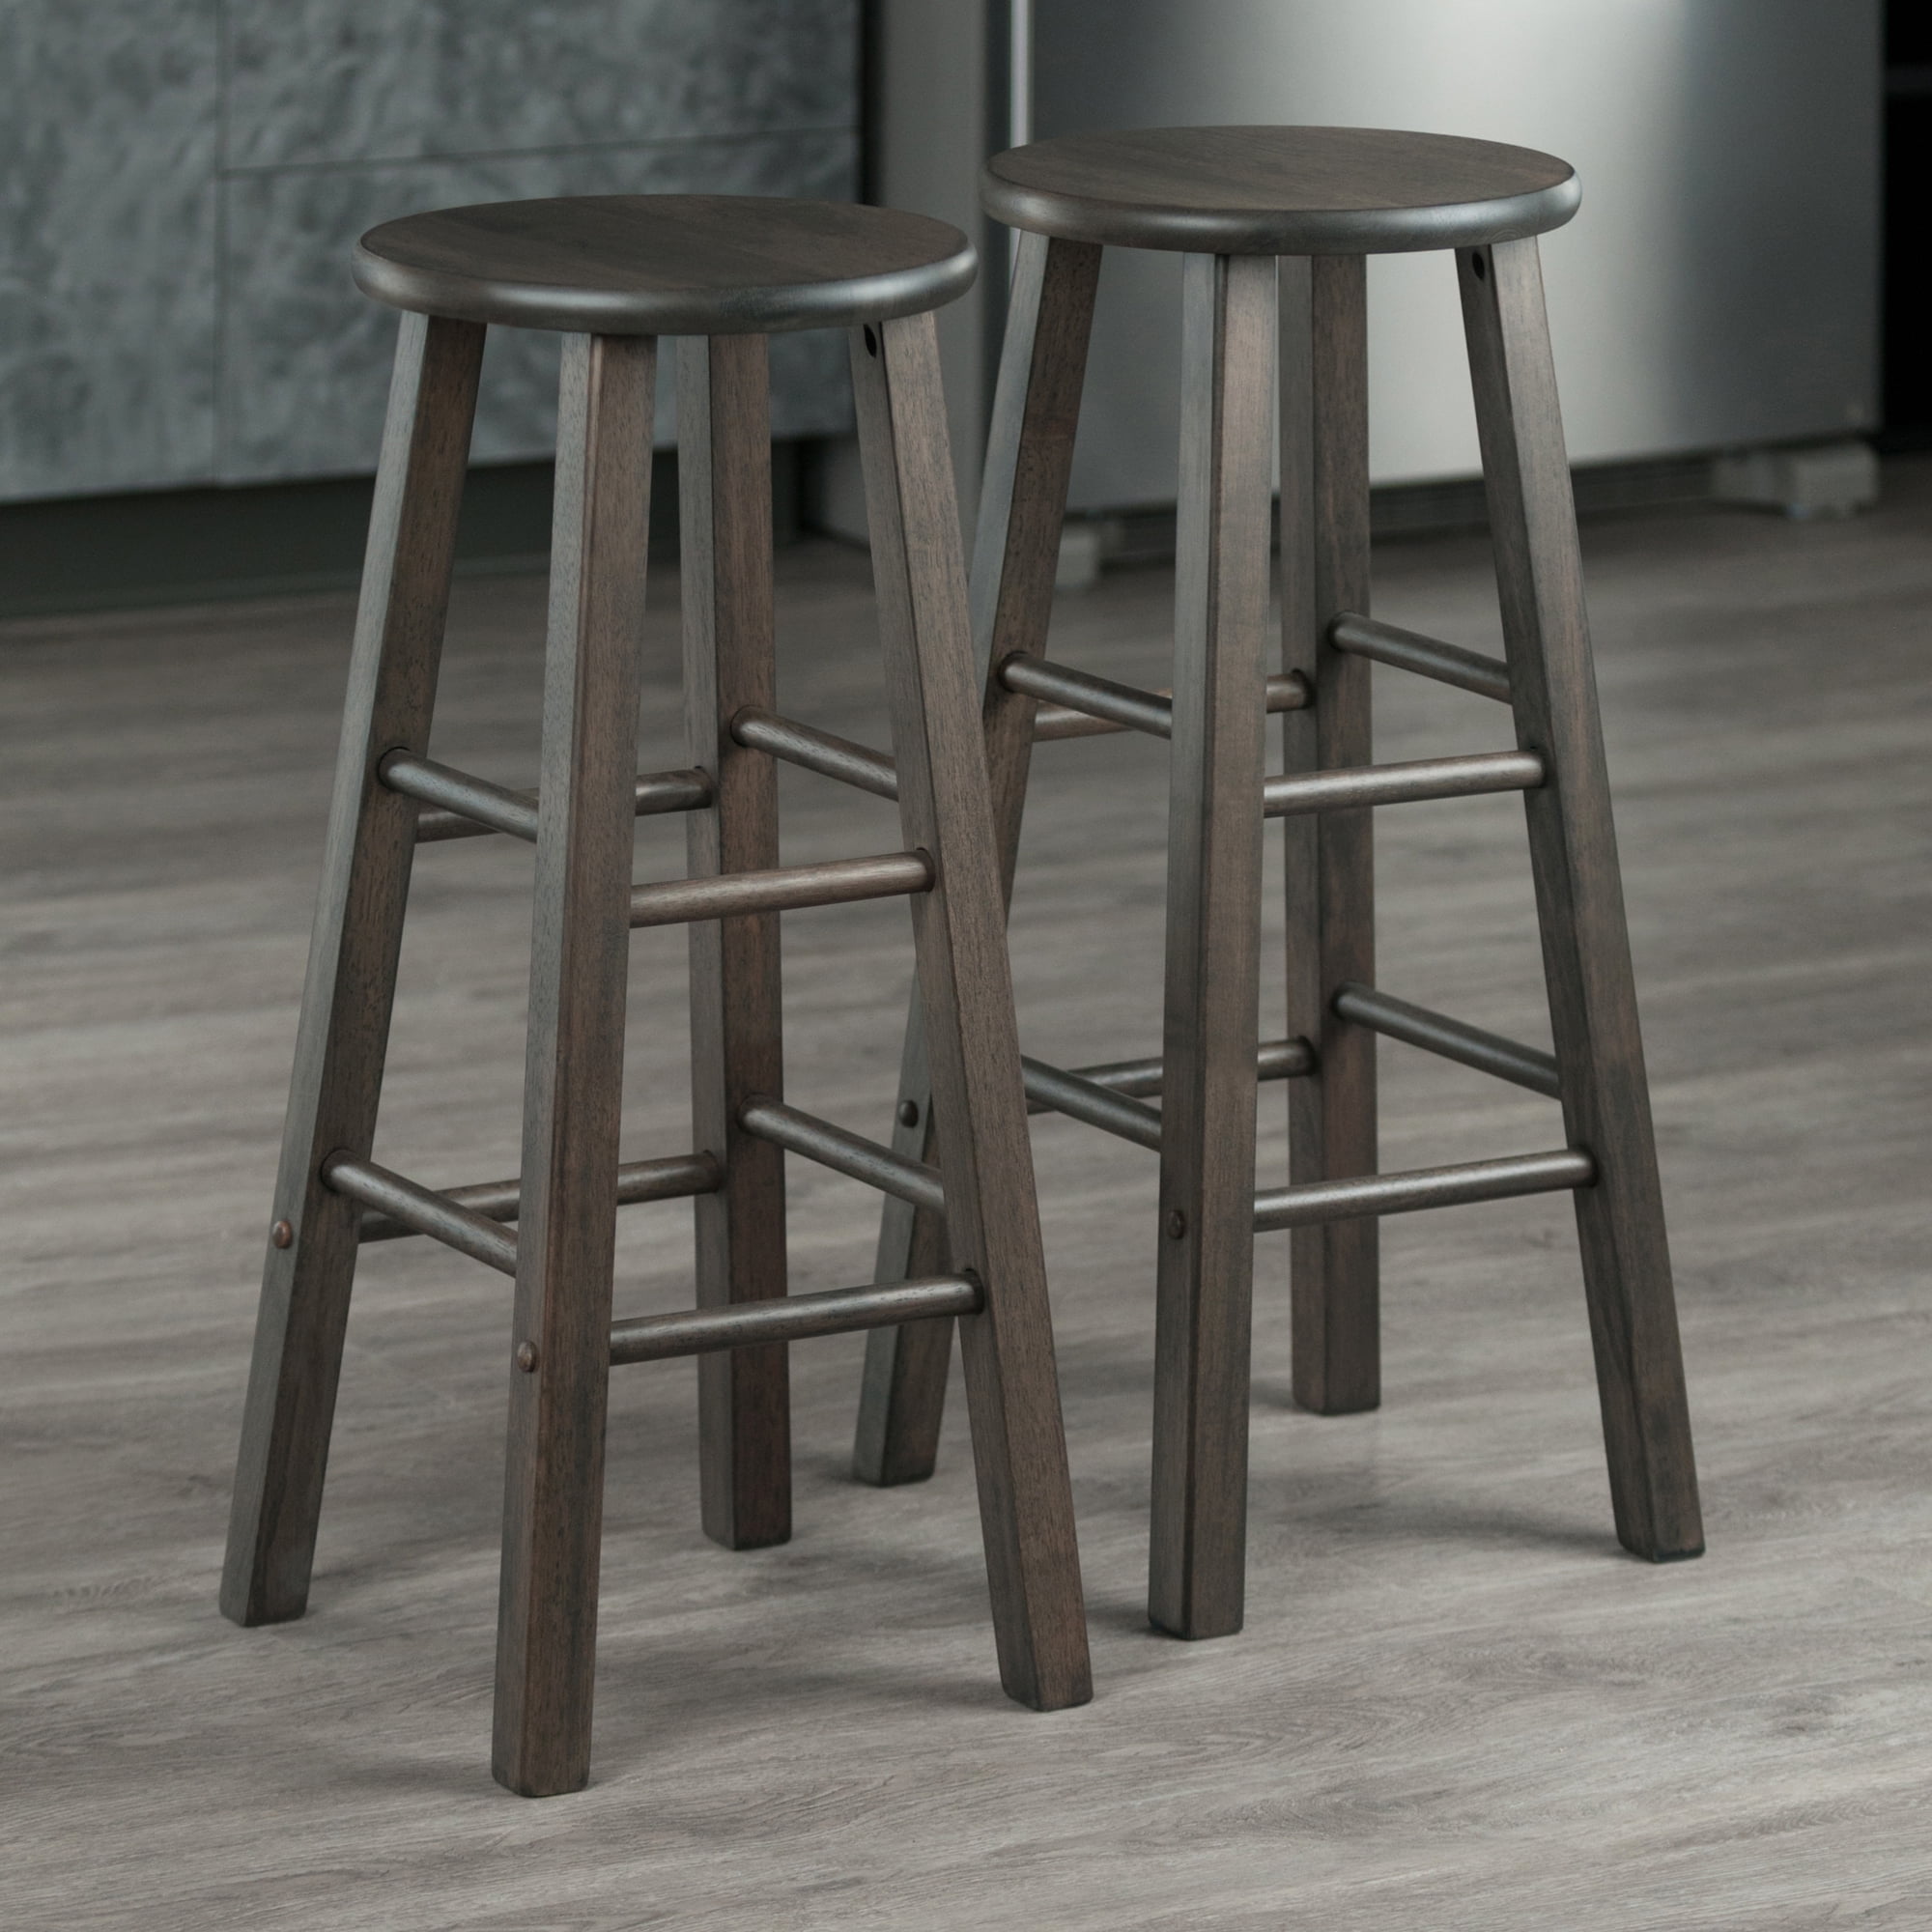 2 Winsome Wood 29-Inch Square Leg Bar Stool Natural Set of 2 